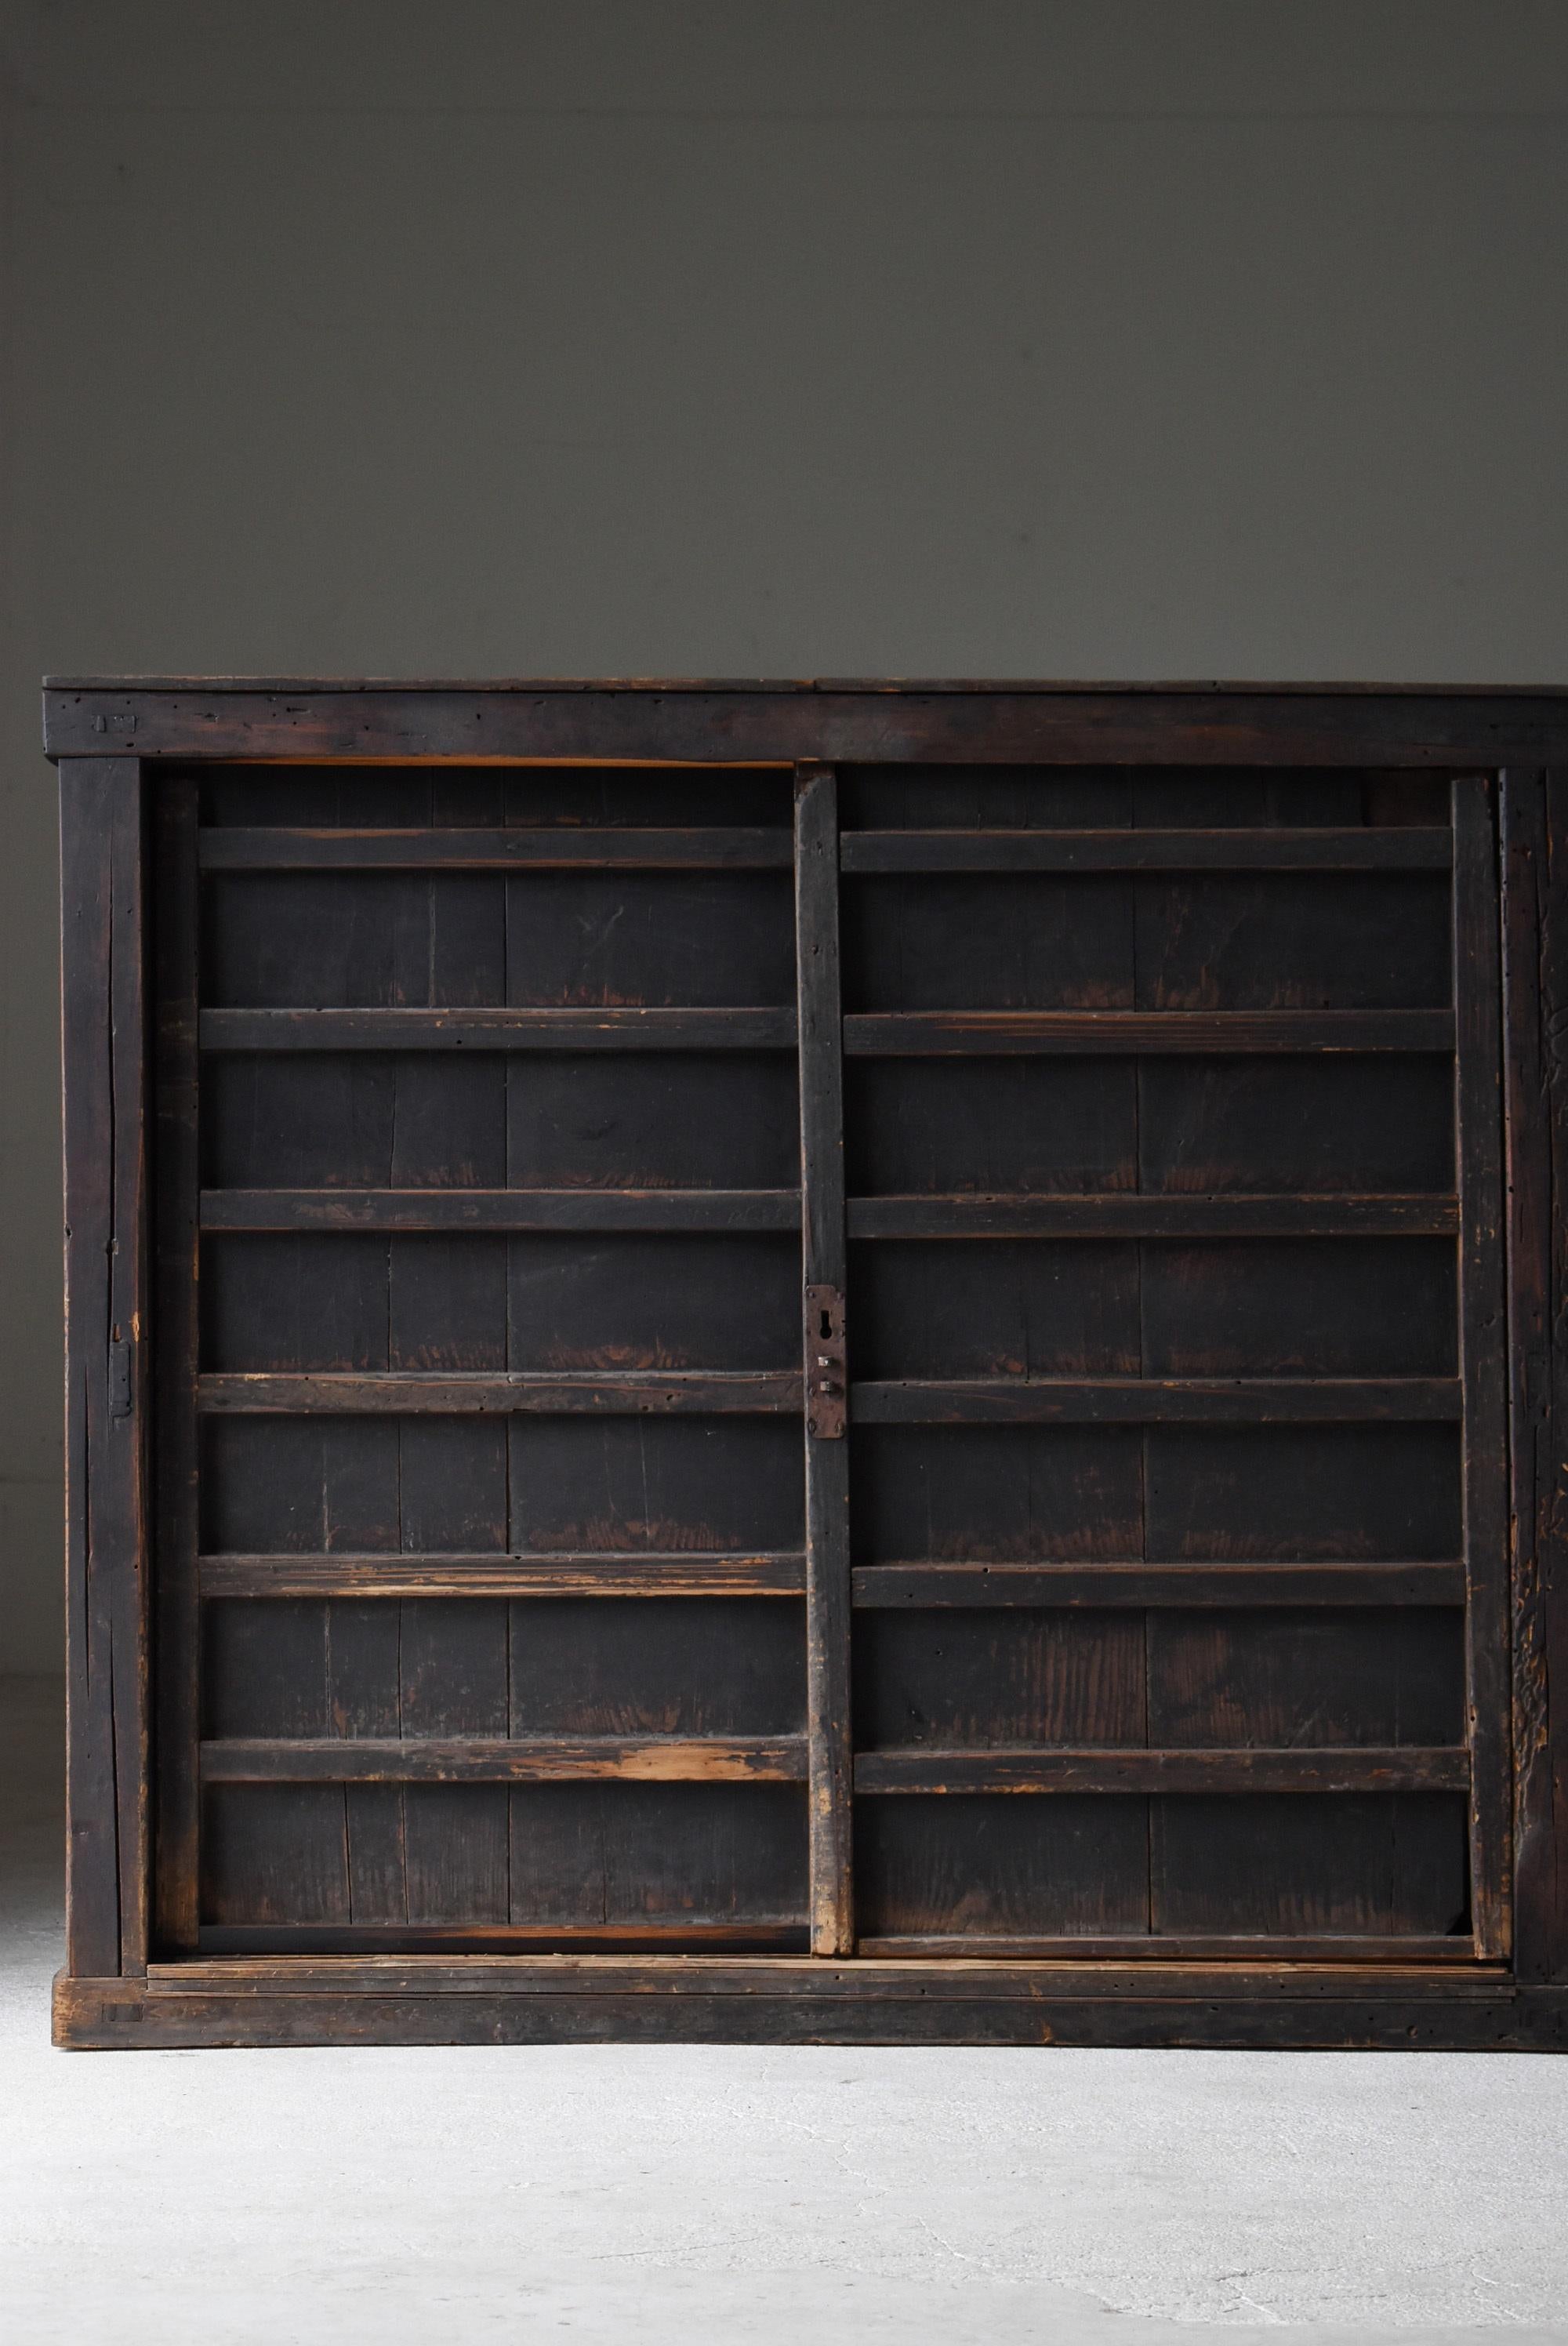 It is a very old Japanese large tansu.
It is made of cedar trees.
Furniture from the Edo period. (1800s-1860s)

Such black tansu is rarely found in Japan year by year.
It can be said that it is a miracle that remains in this state.
The lean